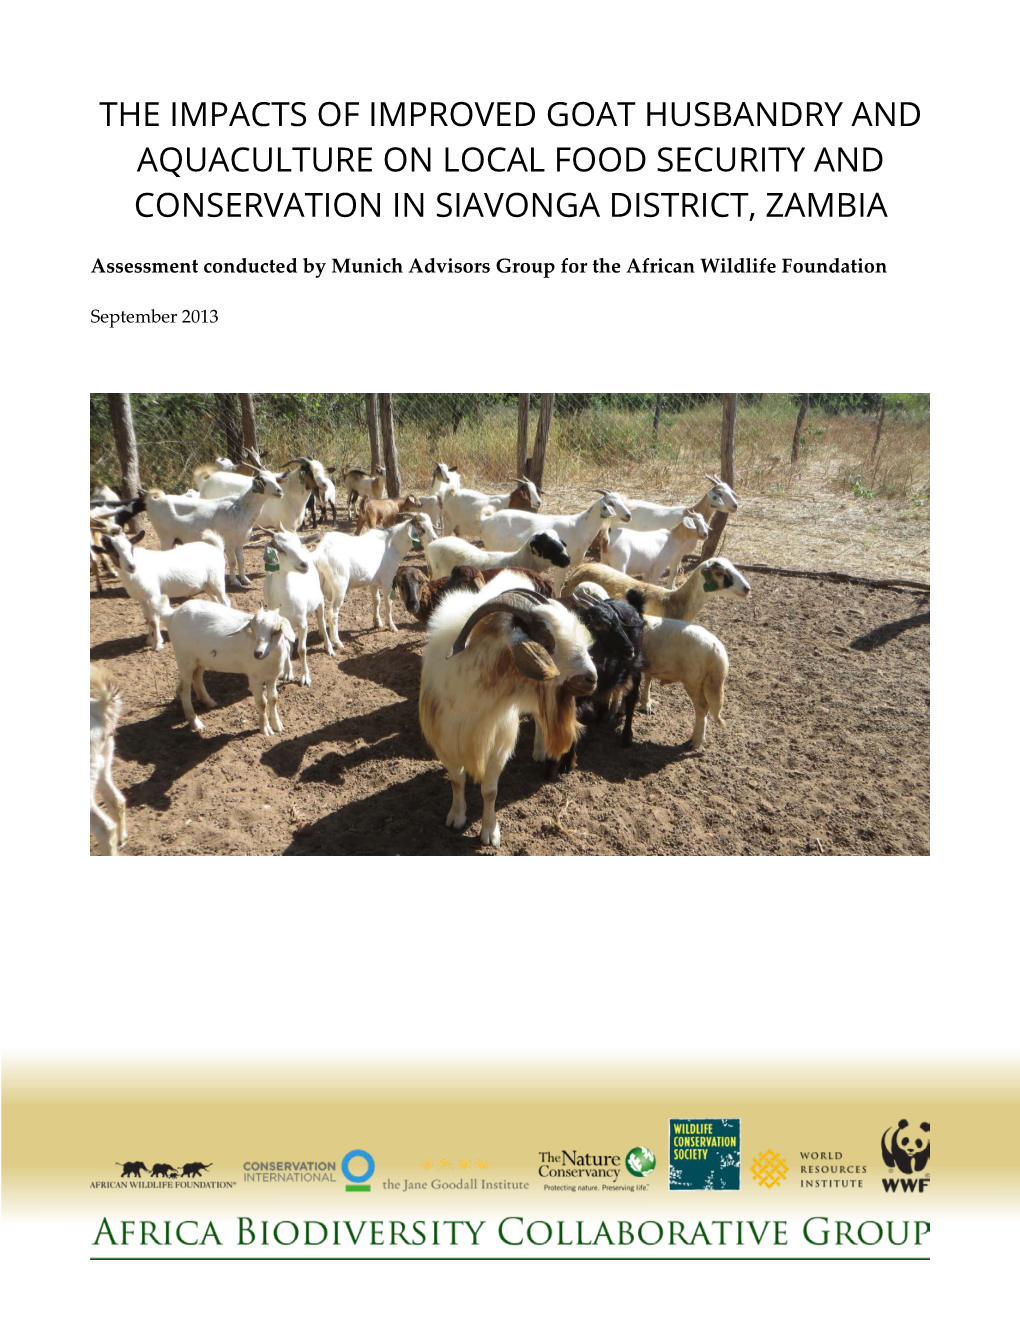 The Impacts of Improved Goat Husbandry and Aquaculture on Local Food Security and Conservation in Siavonga District, Zambia